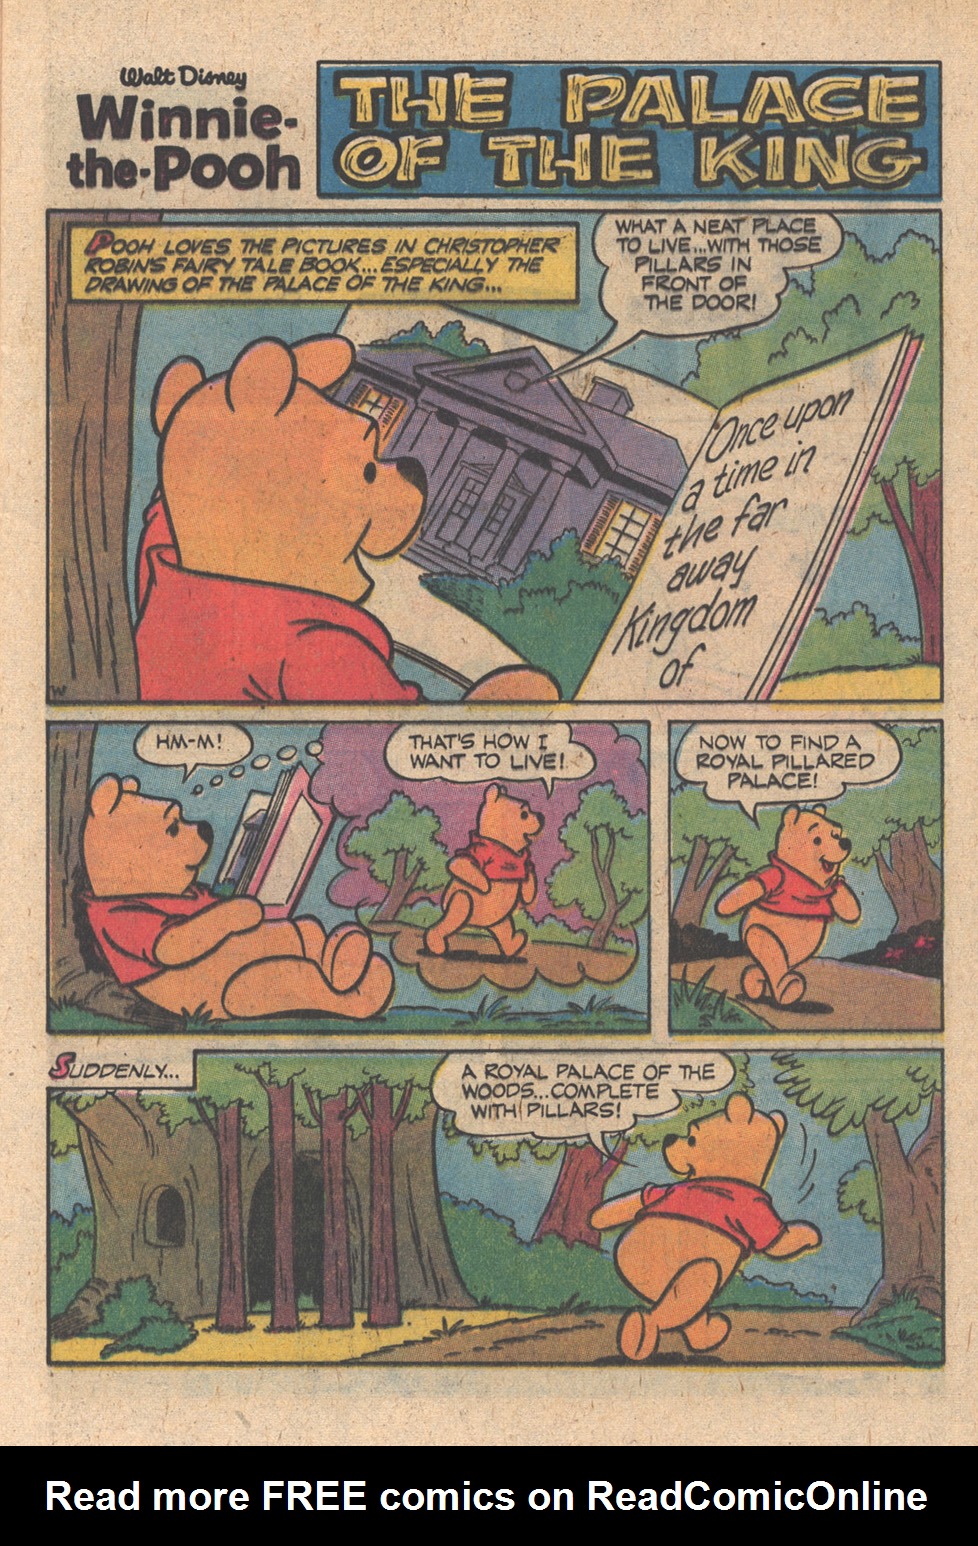 Read online Winnie-the-Pooh comic -  Issue #9 - 9